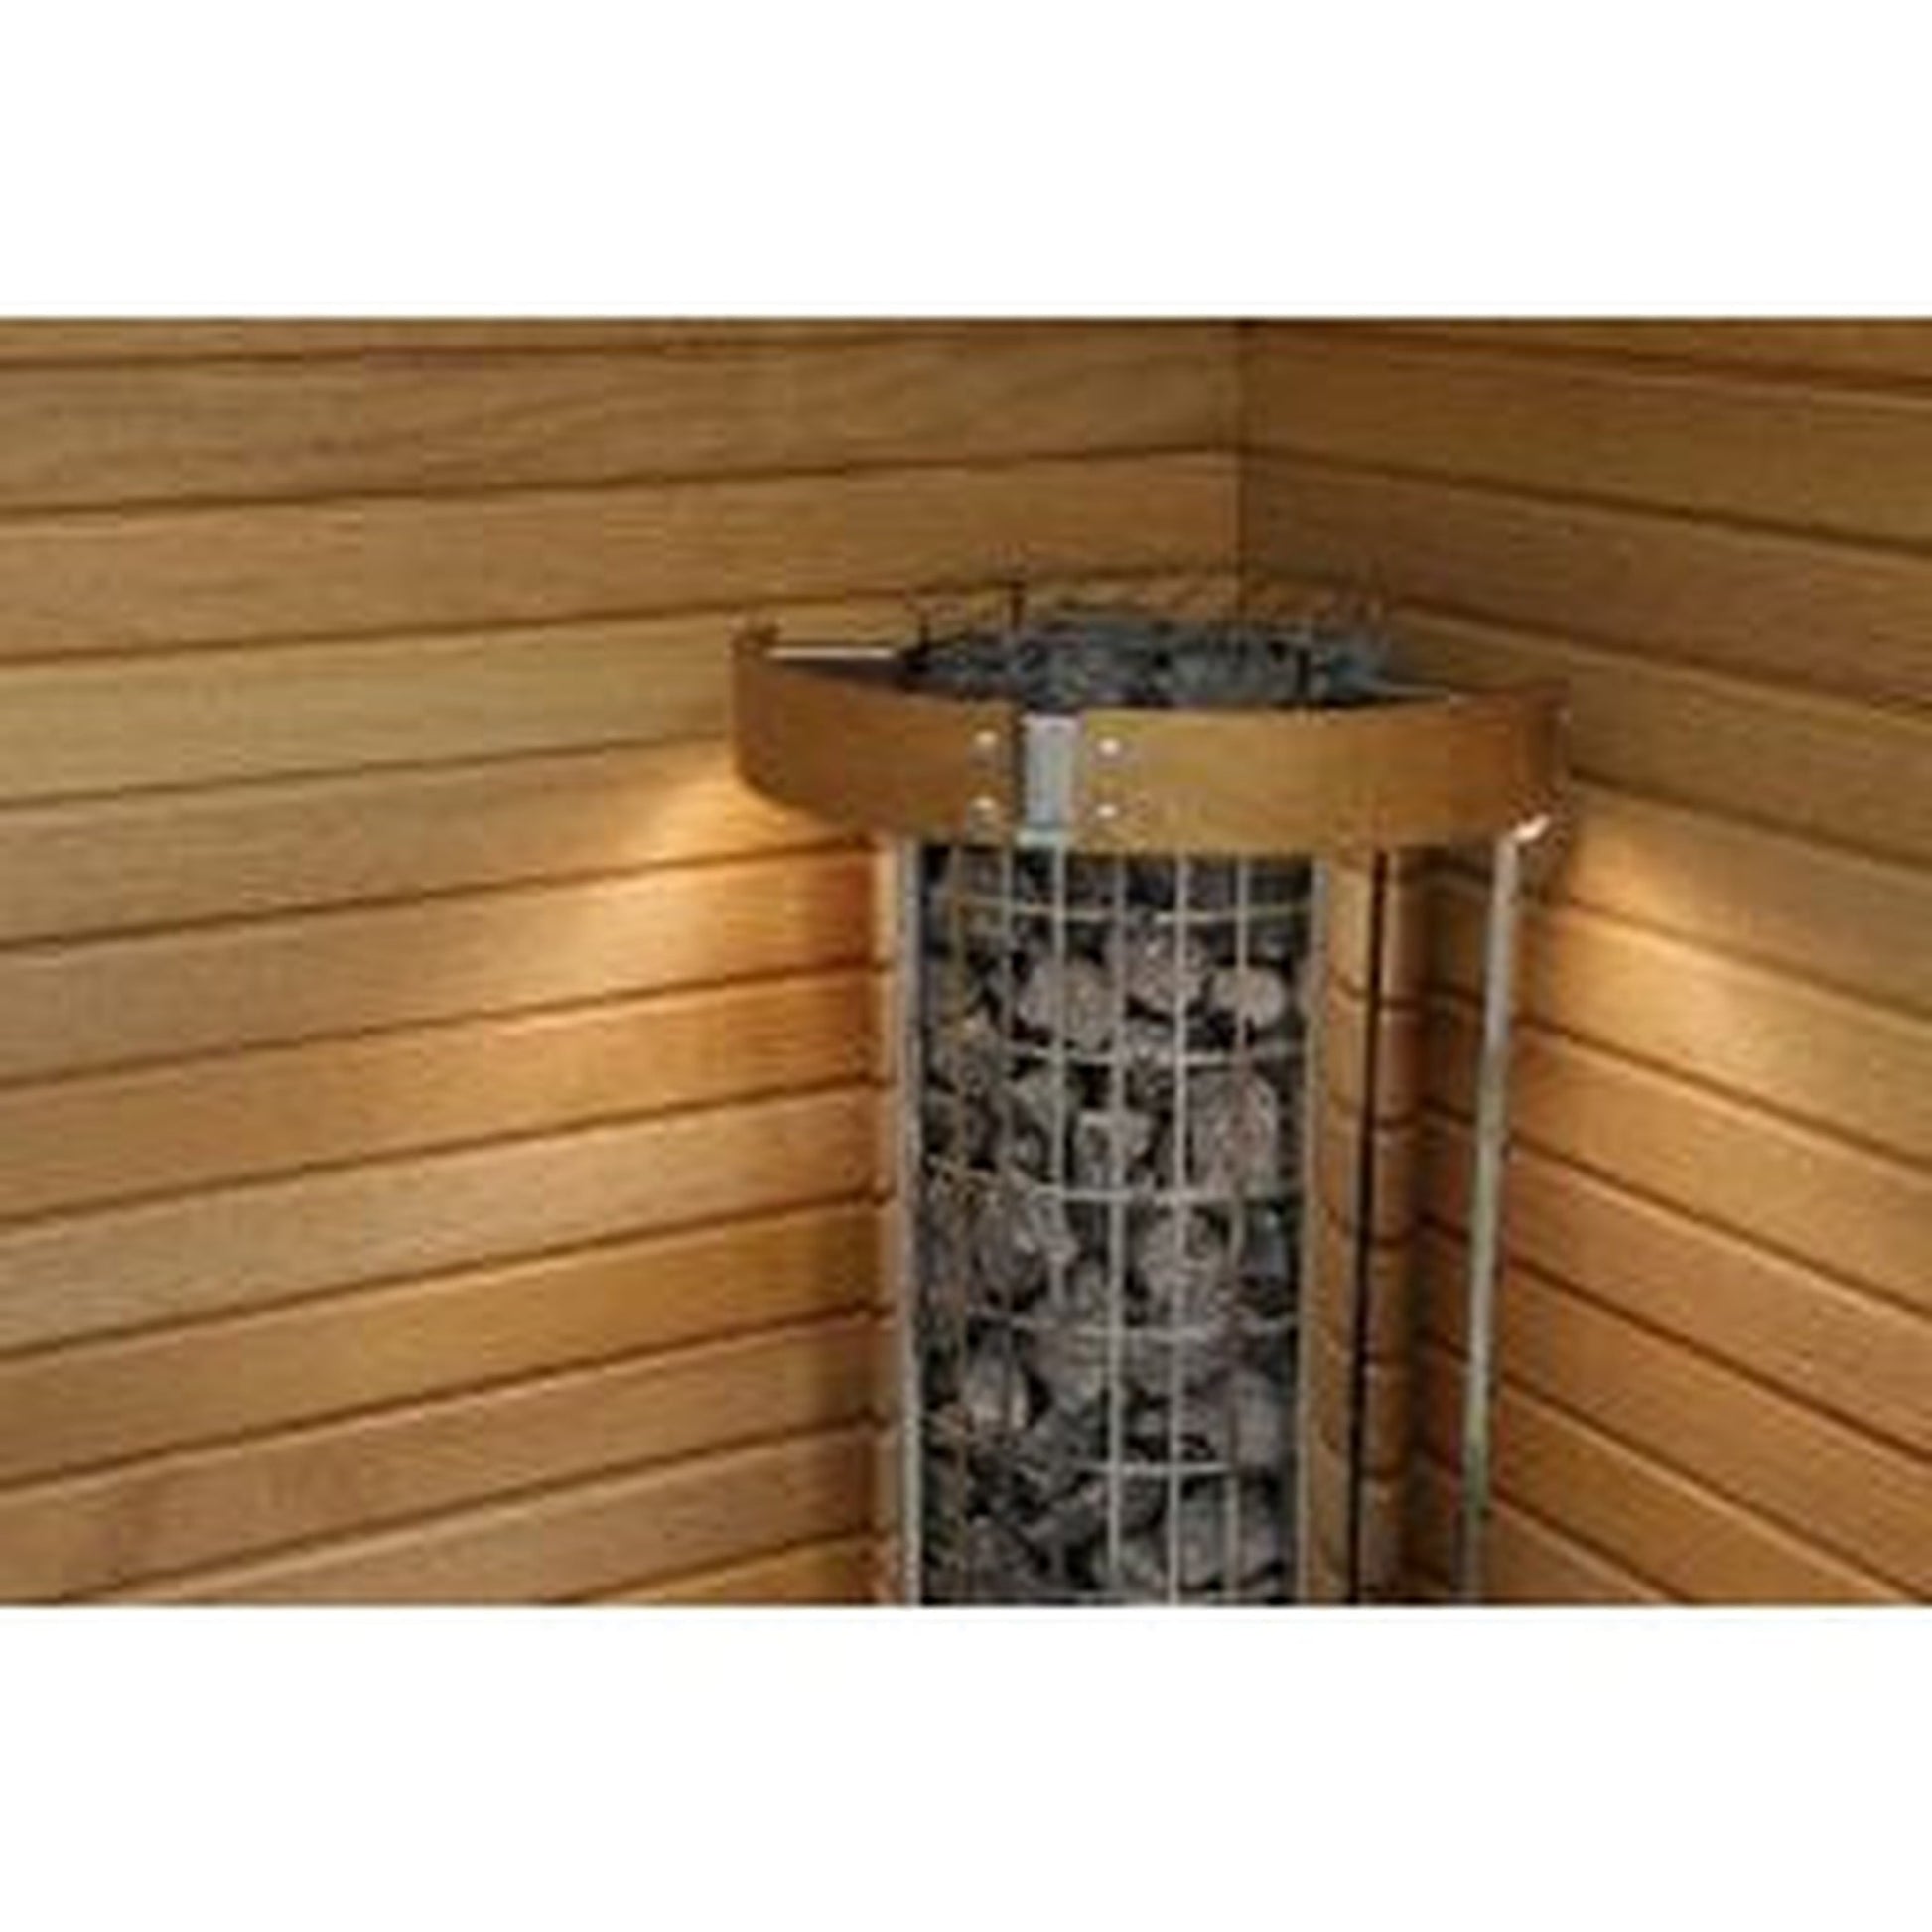 Harvia Cilindro Half Series 8 kW 240V 1PH Freestanding Stainless Steel Electric Sauna Heater With Built-In Timer and Temperature Control